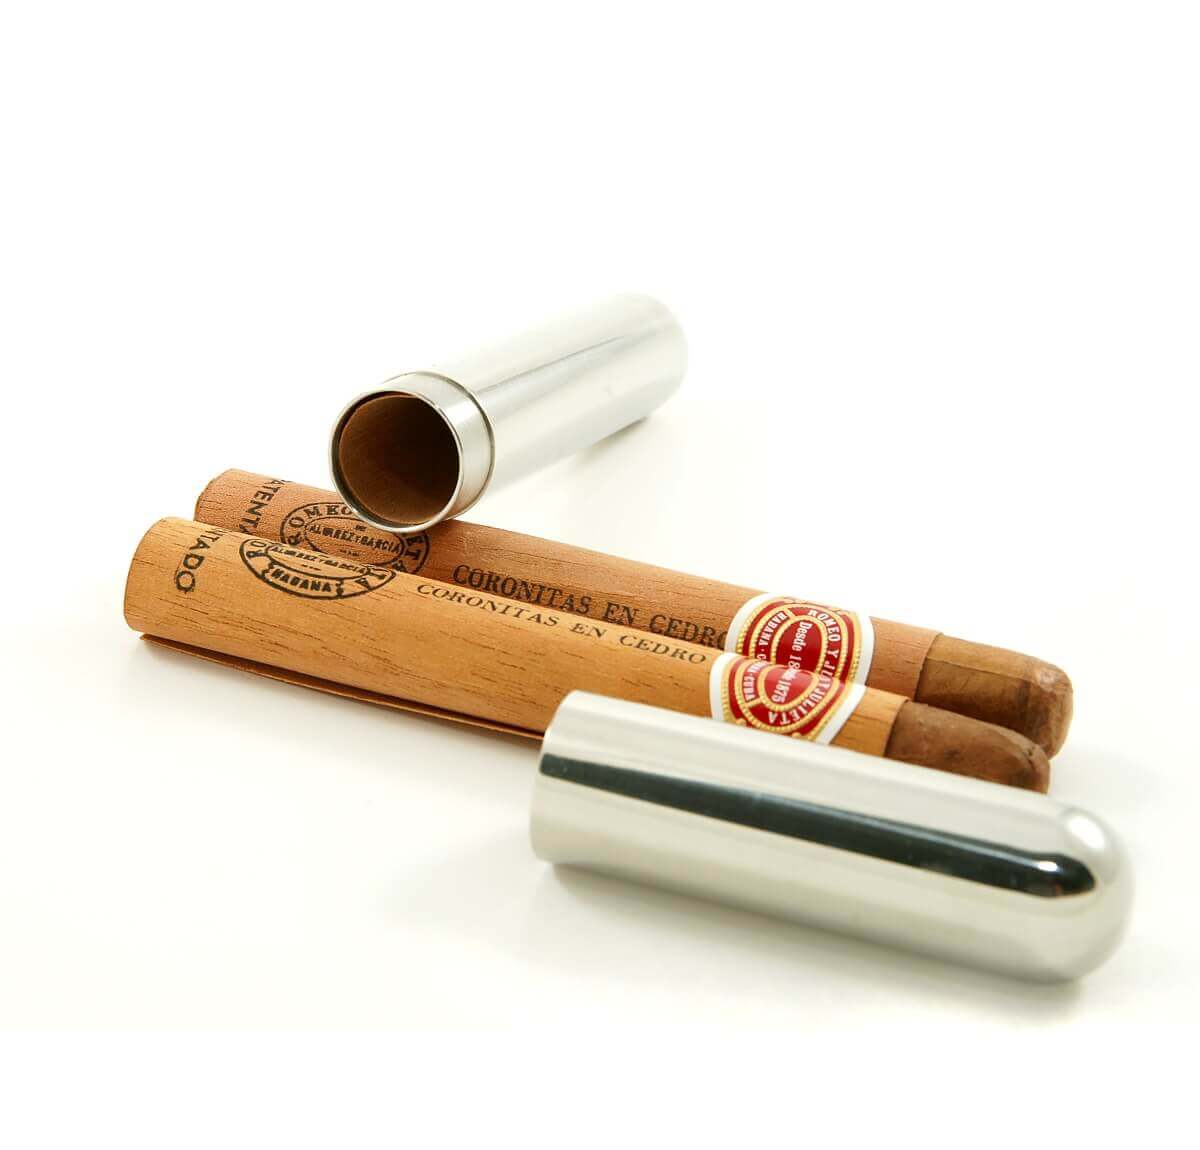 Great stocking stuffer for the cigar lover.